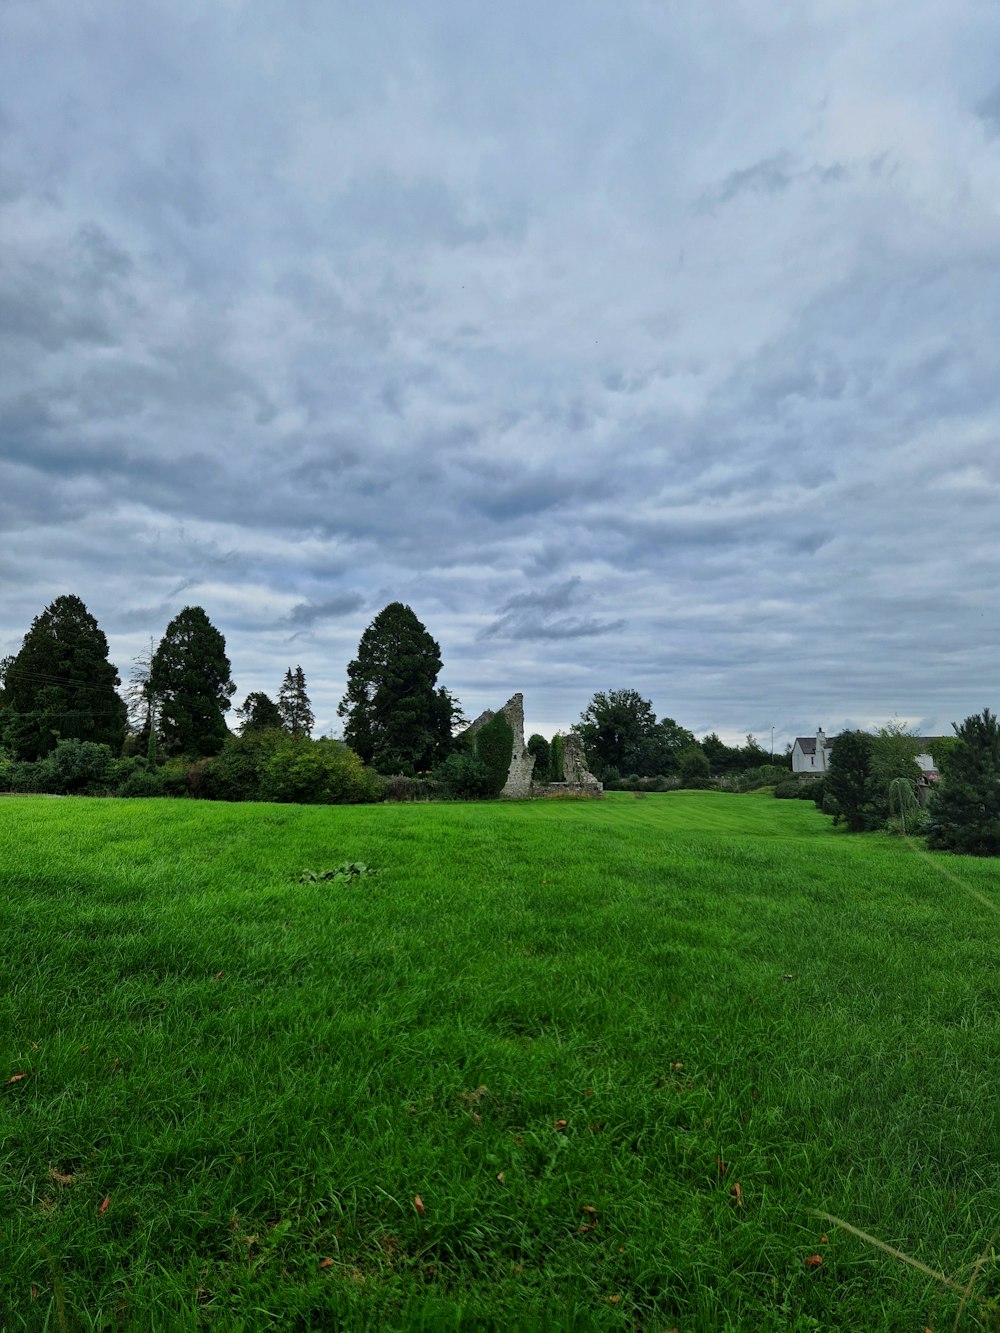 a grassy field with trees and stone structures in the distance